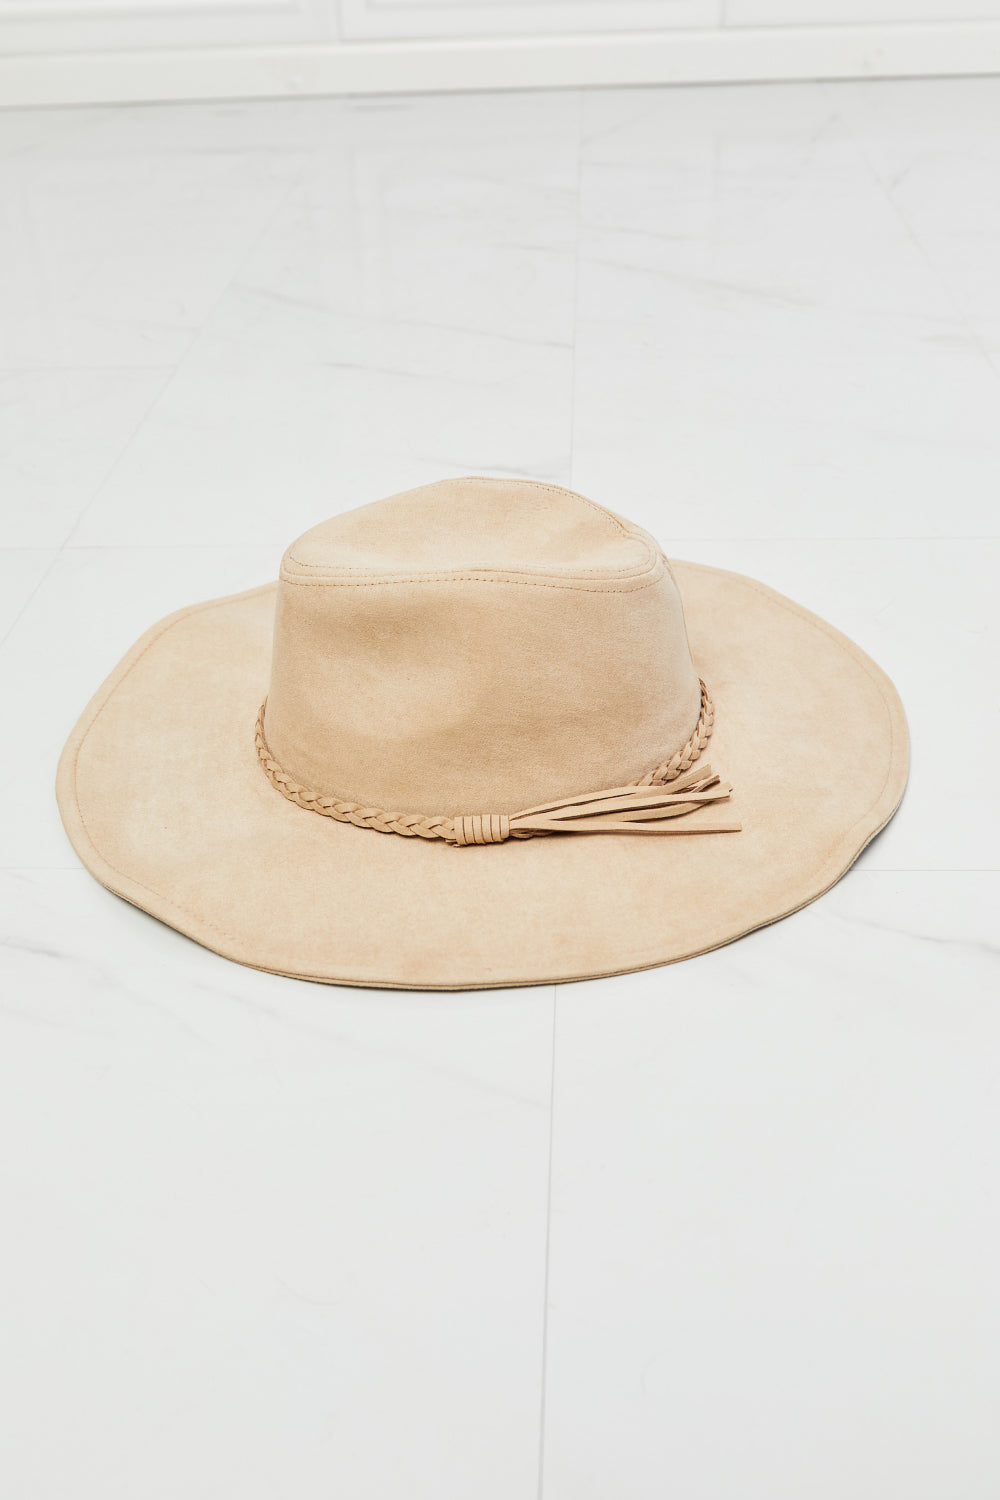 Fame Forever My Moment Suede Fedora Hat in Ivory